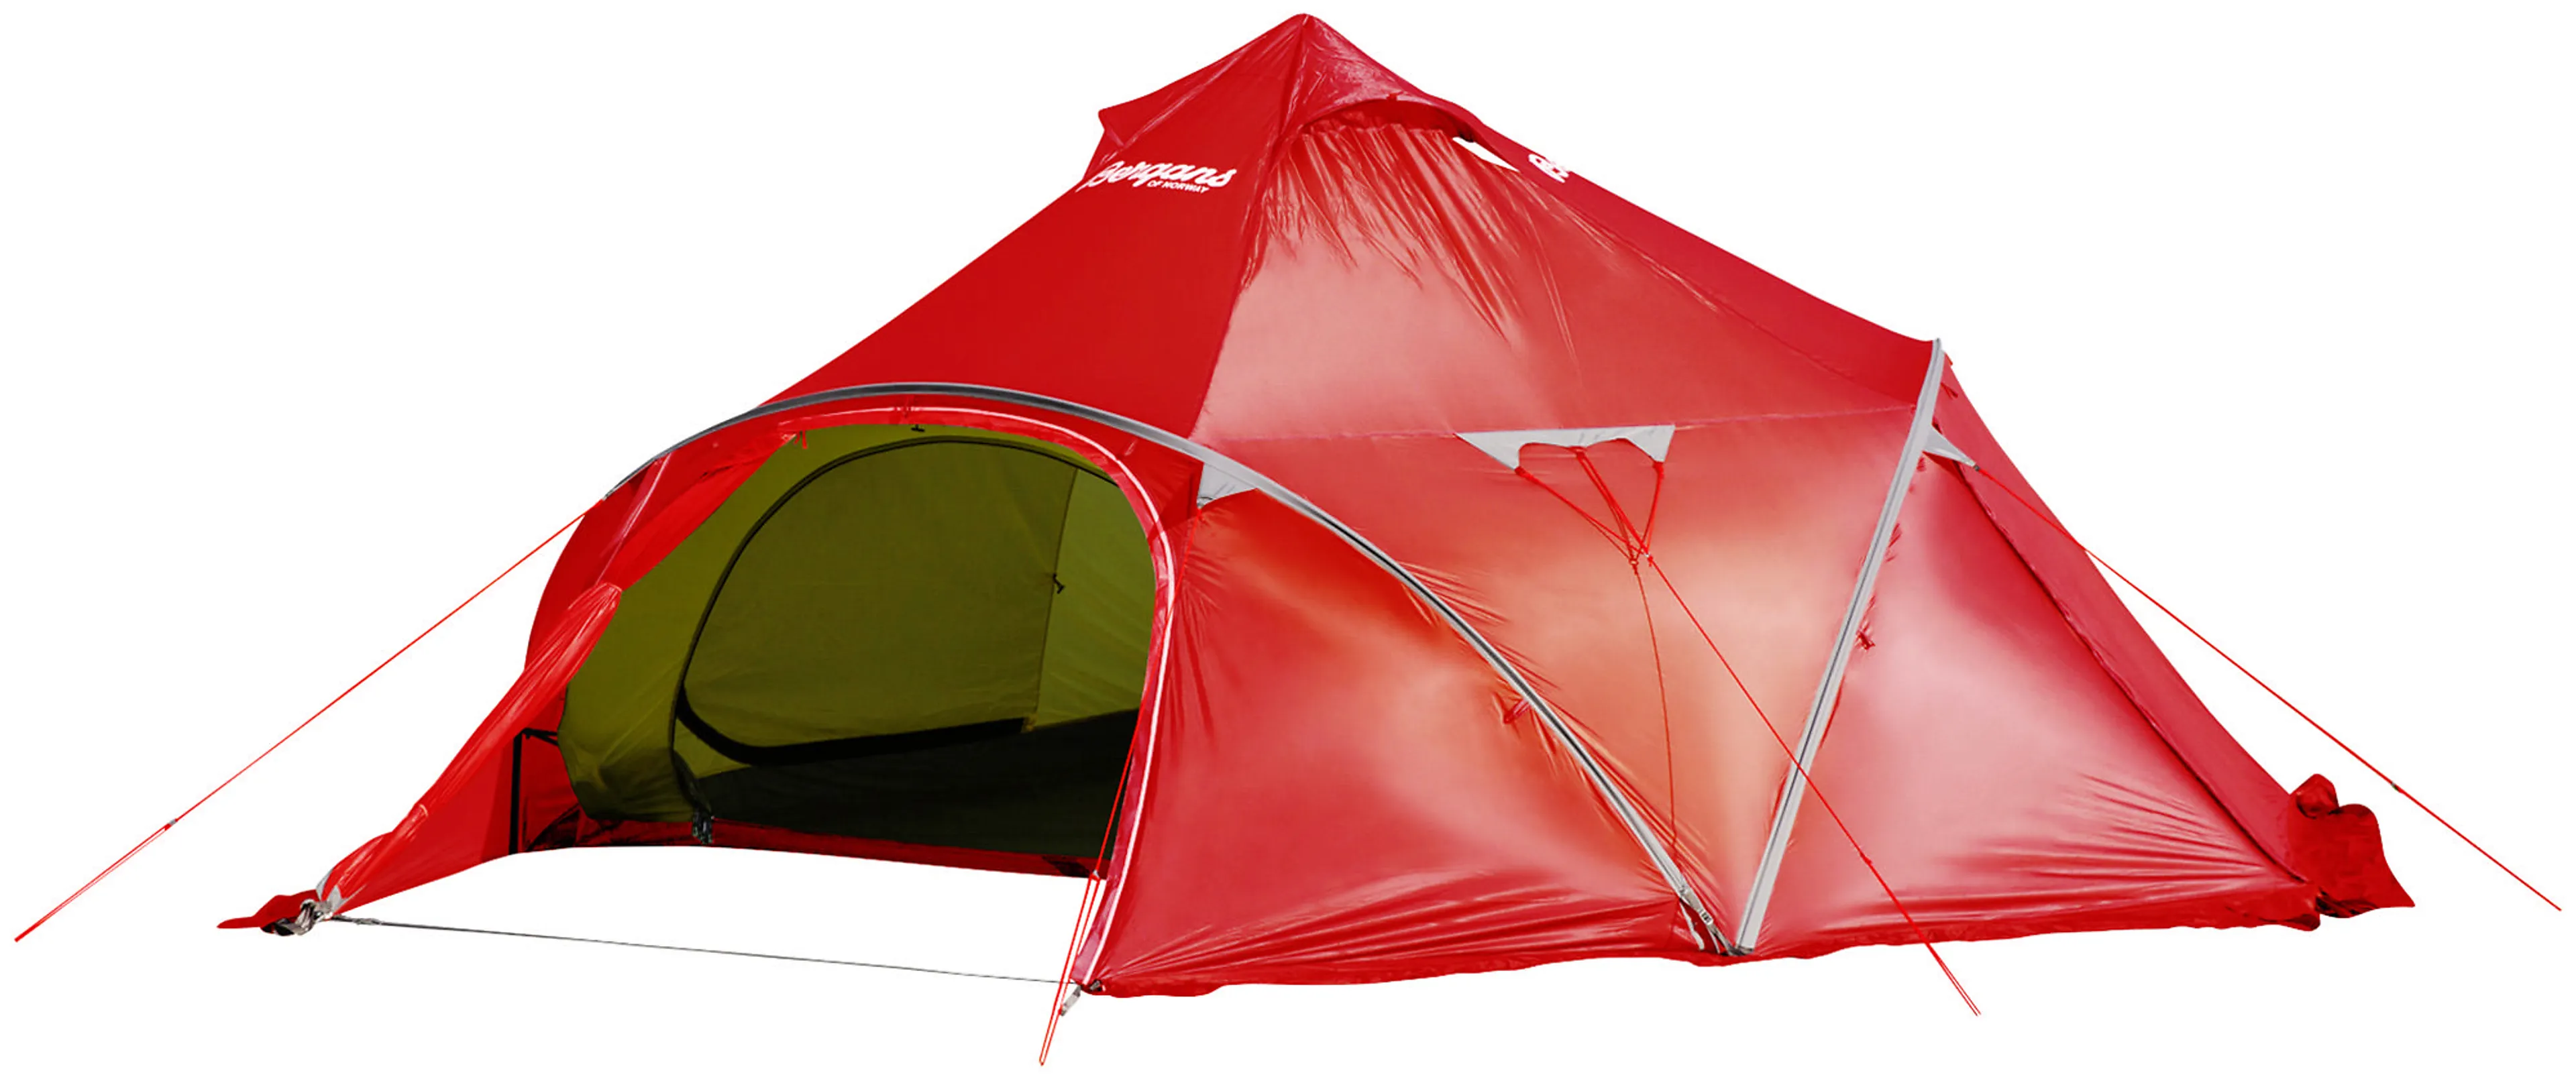 Wiglo® LT 6-Pers Tent